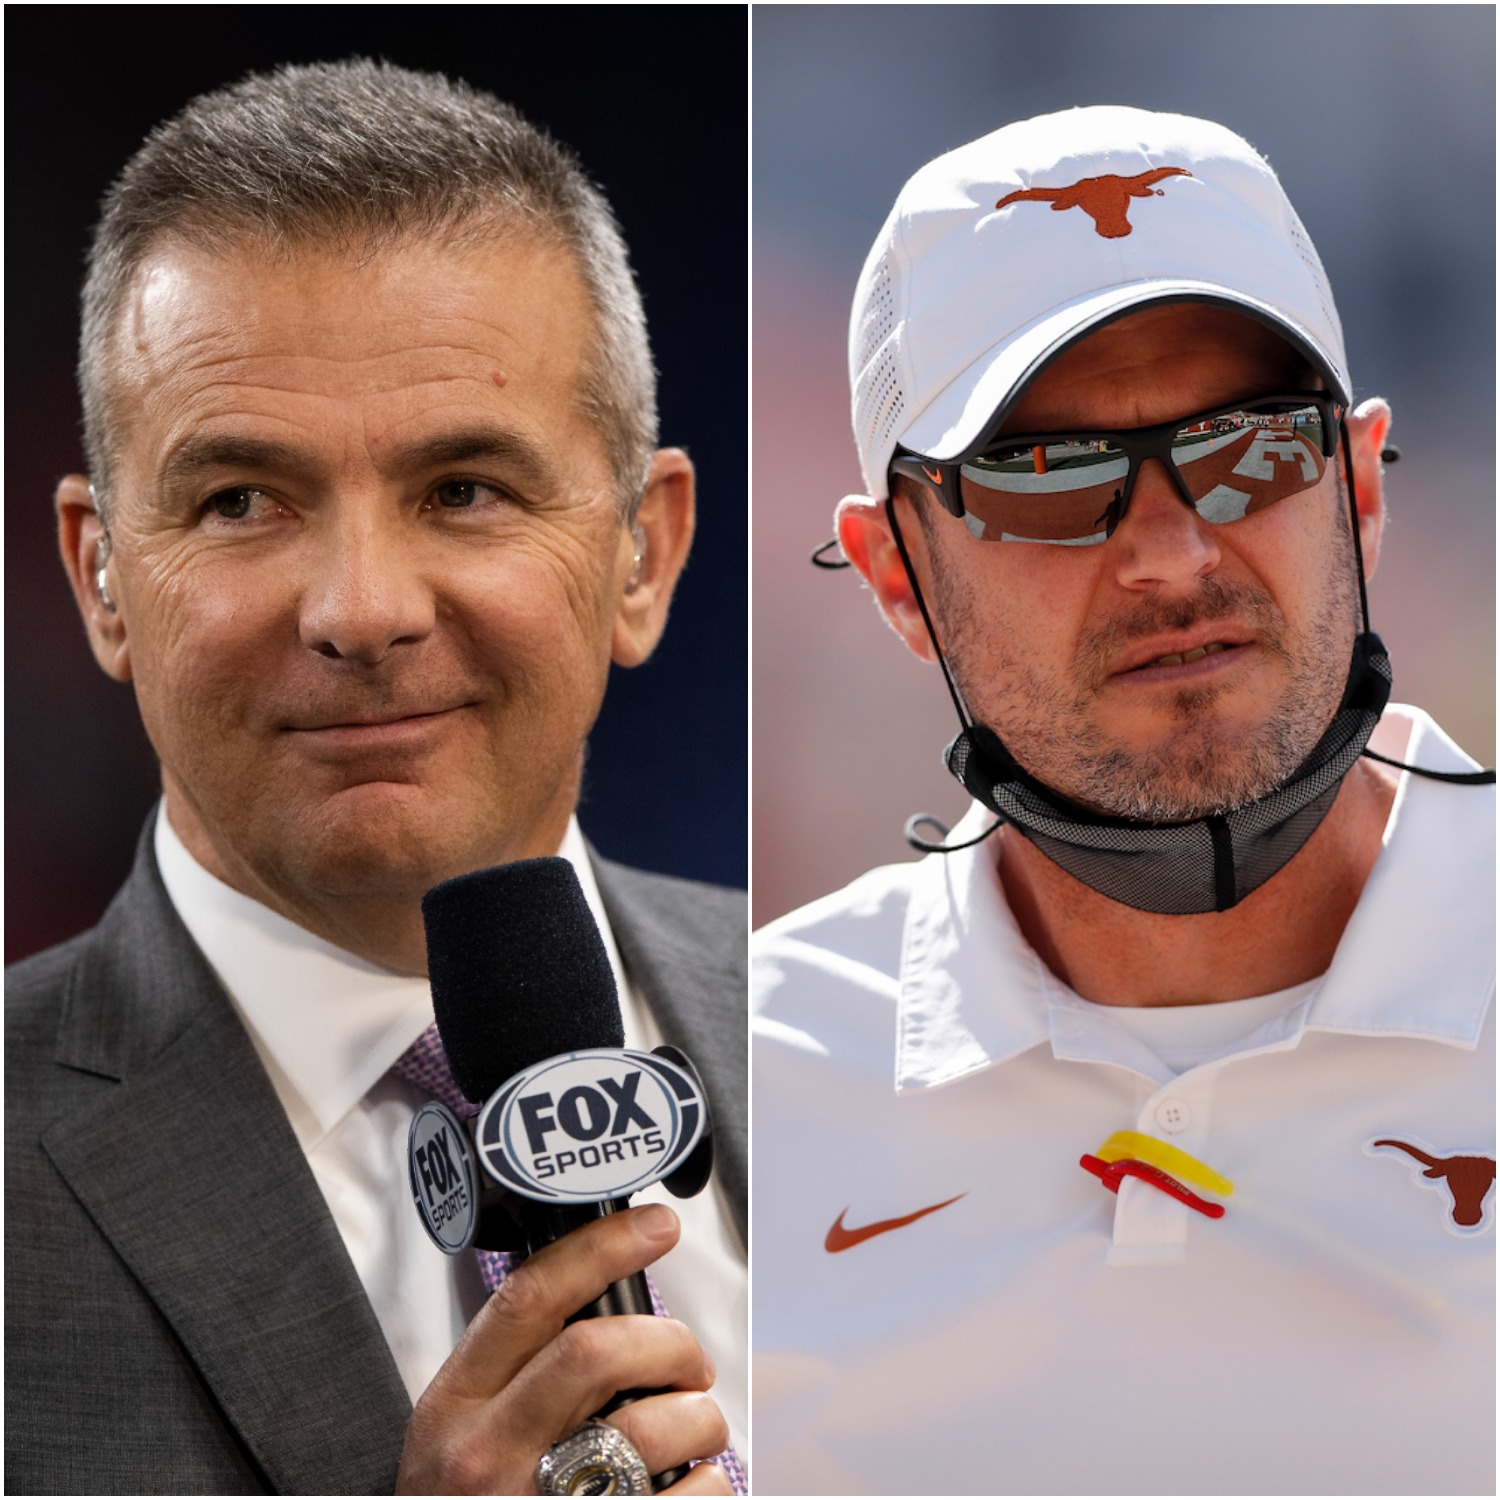 Urban Meyer and Tom Herman and the Texas Longhorns